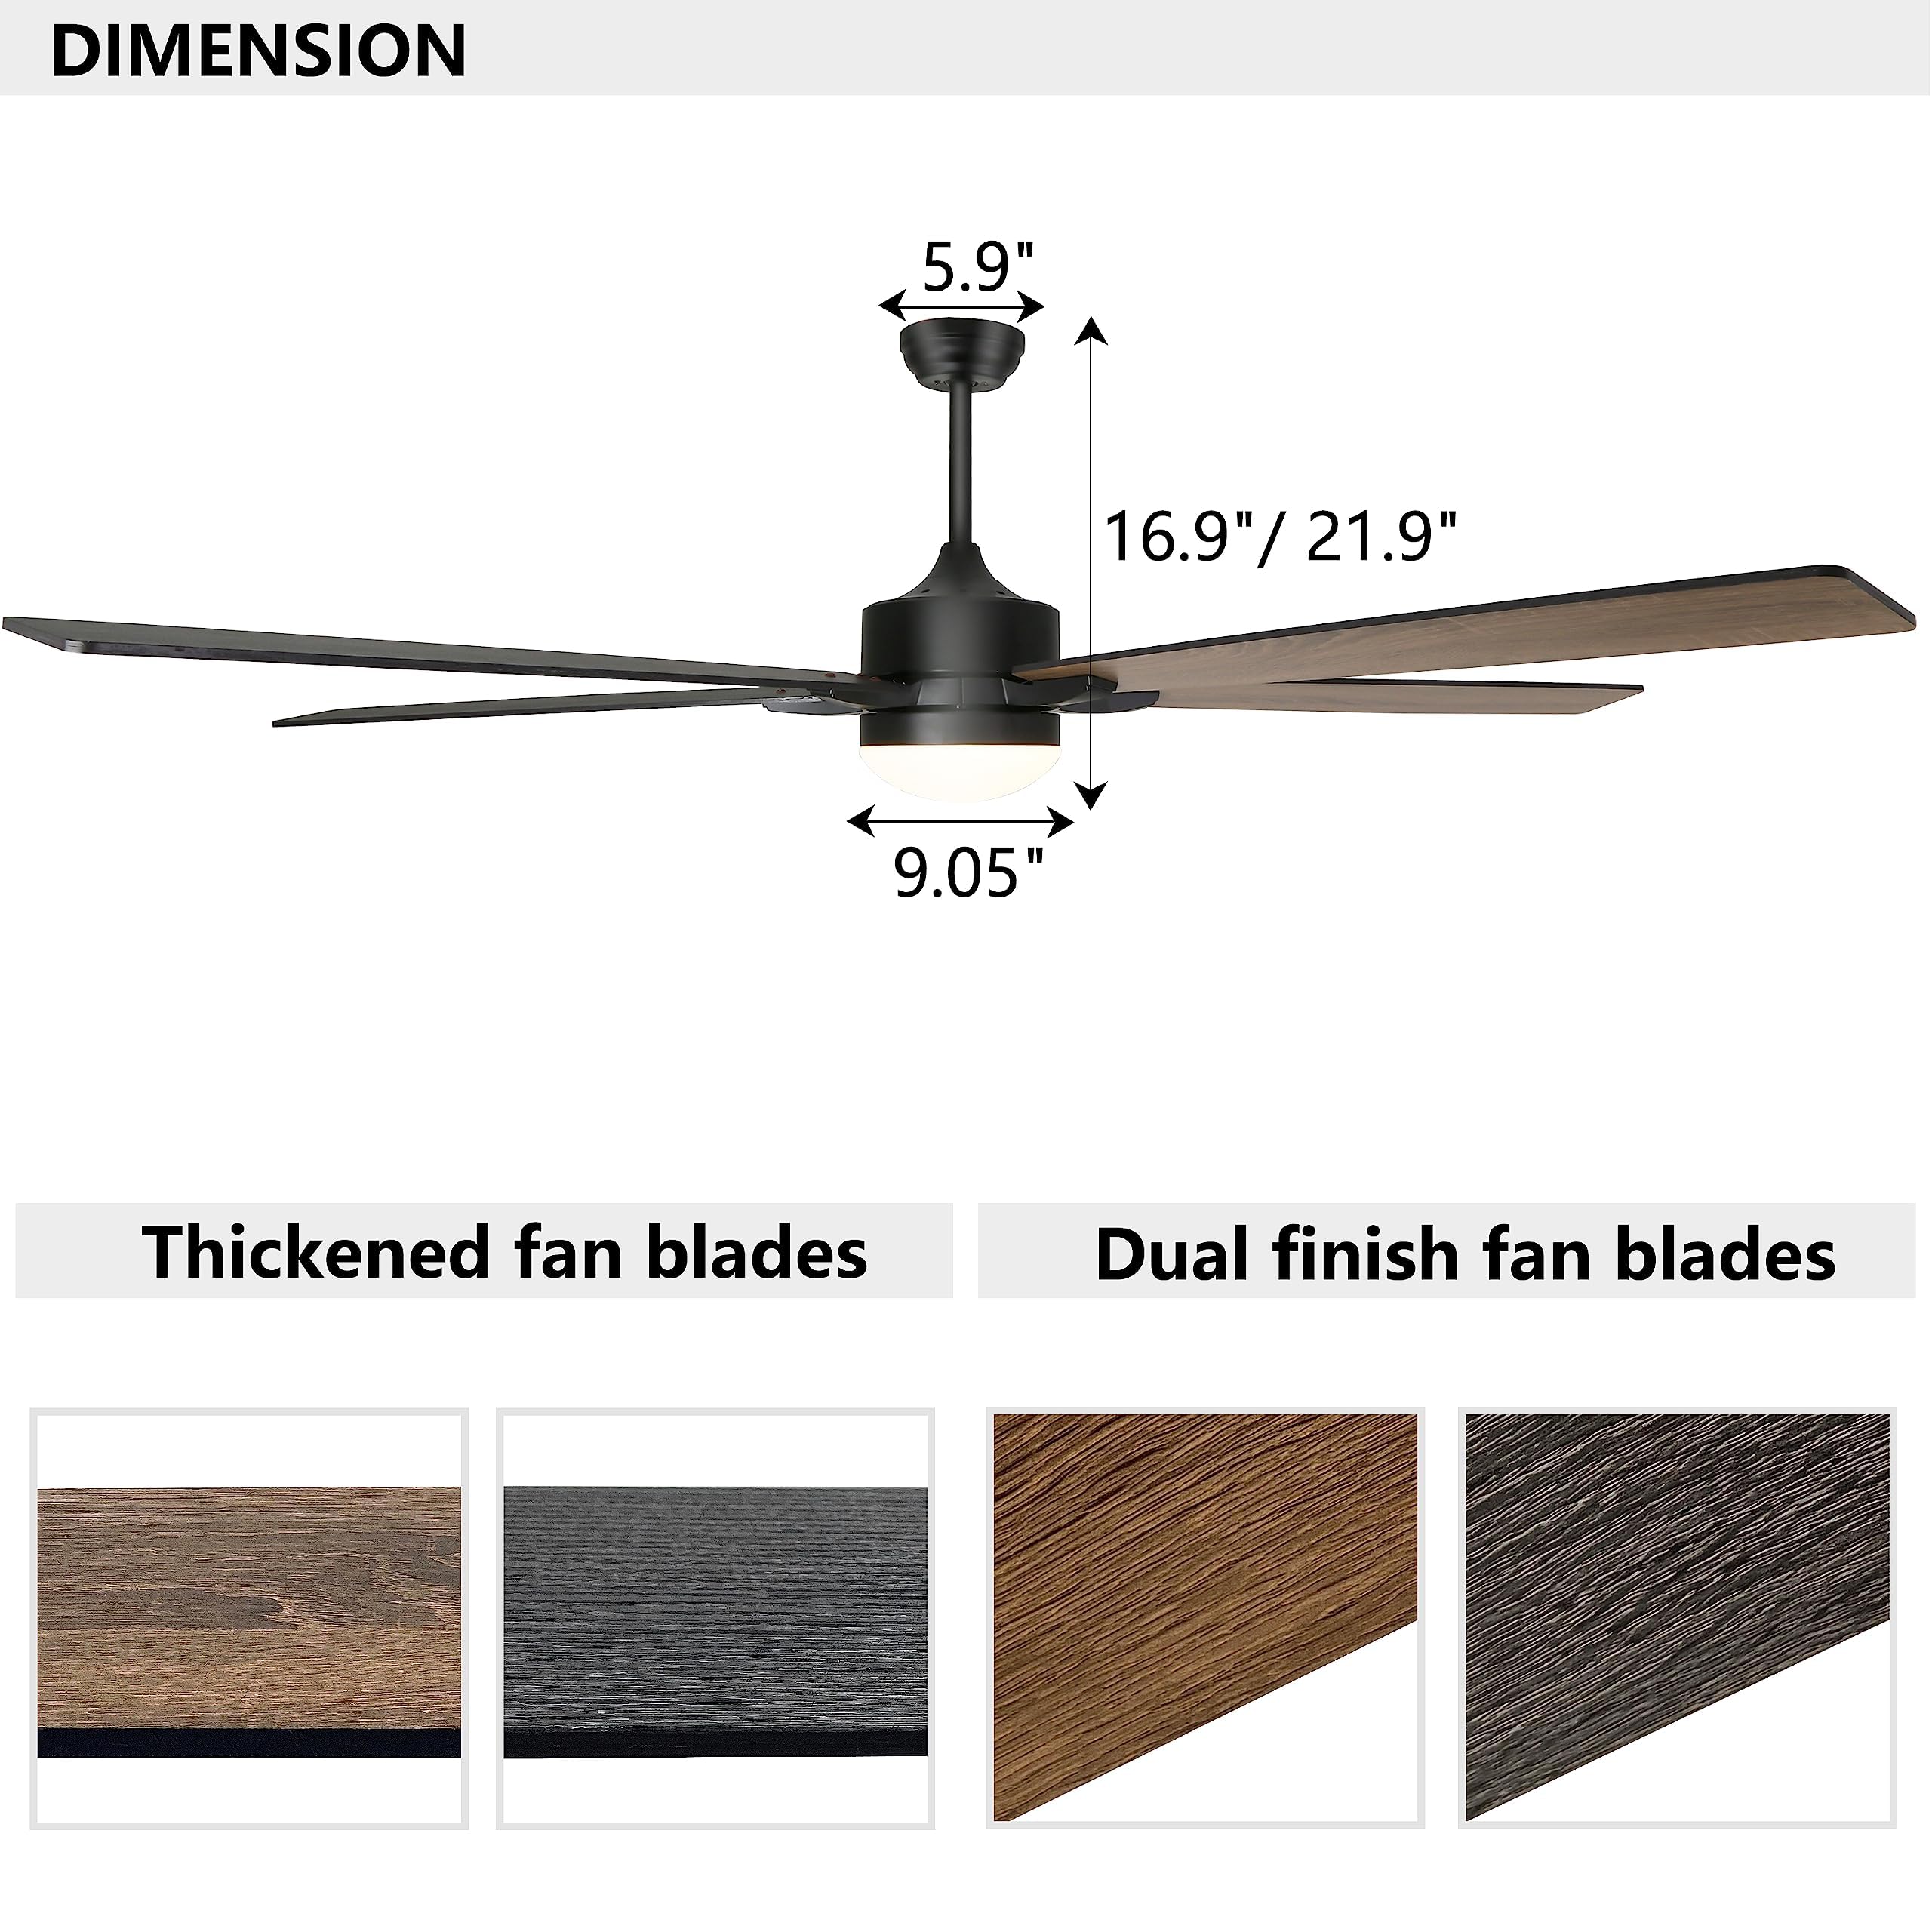 Ohniyou Large Ceiling Fan with Light and Remote, 76 inch Farmhouse Outdoor Ceiling Fan with LED Light,Extra Large Big Commercial Ceiling Fan with Light for Garage Shop Indoor